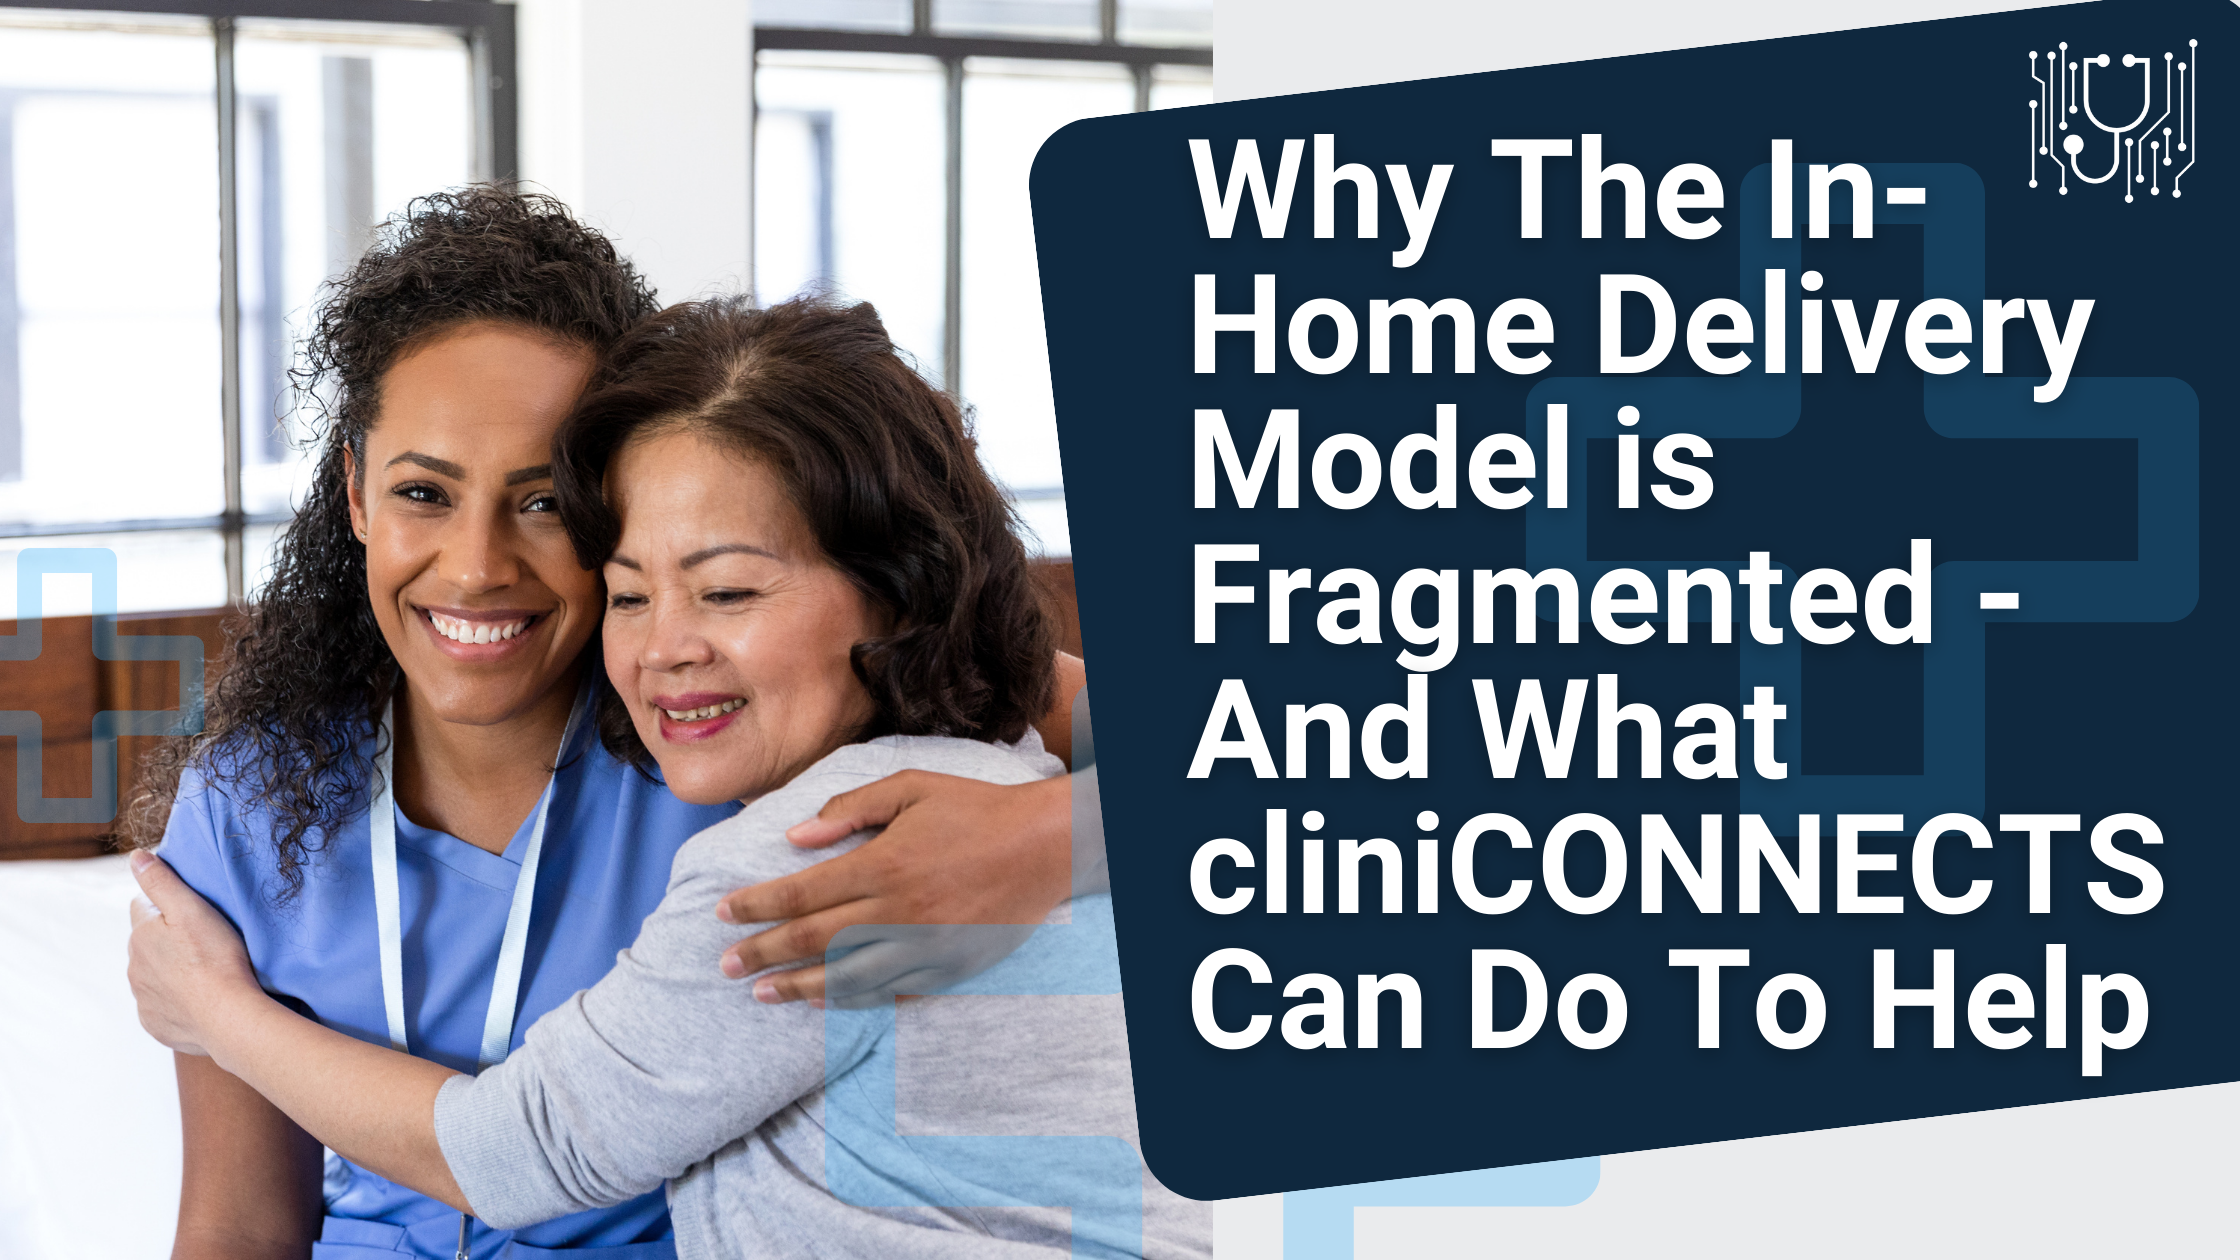 Why The In-Home Delivery Model is Fragmented - And What cliniCONNECTS Can Do To Help